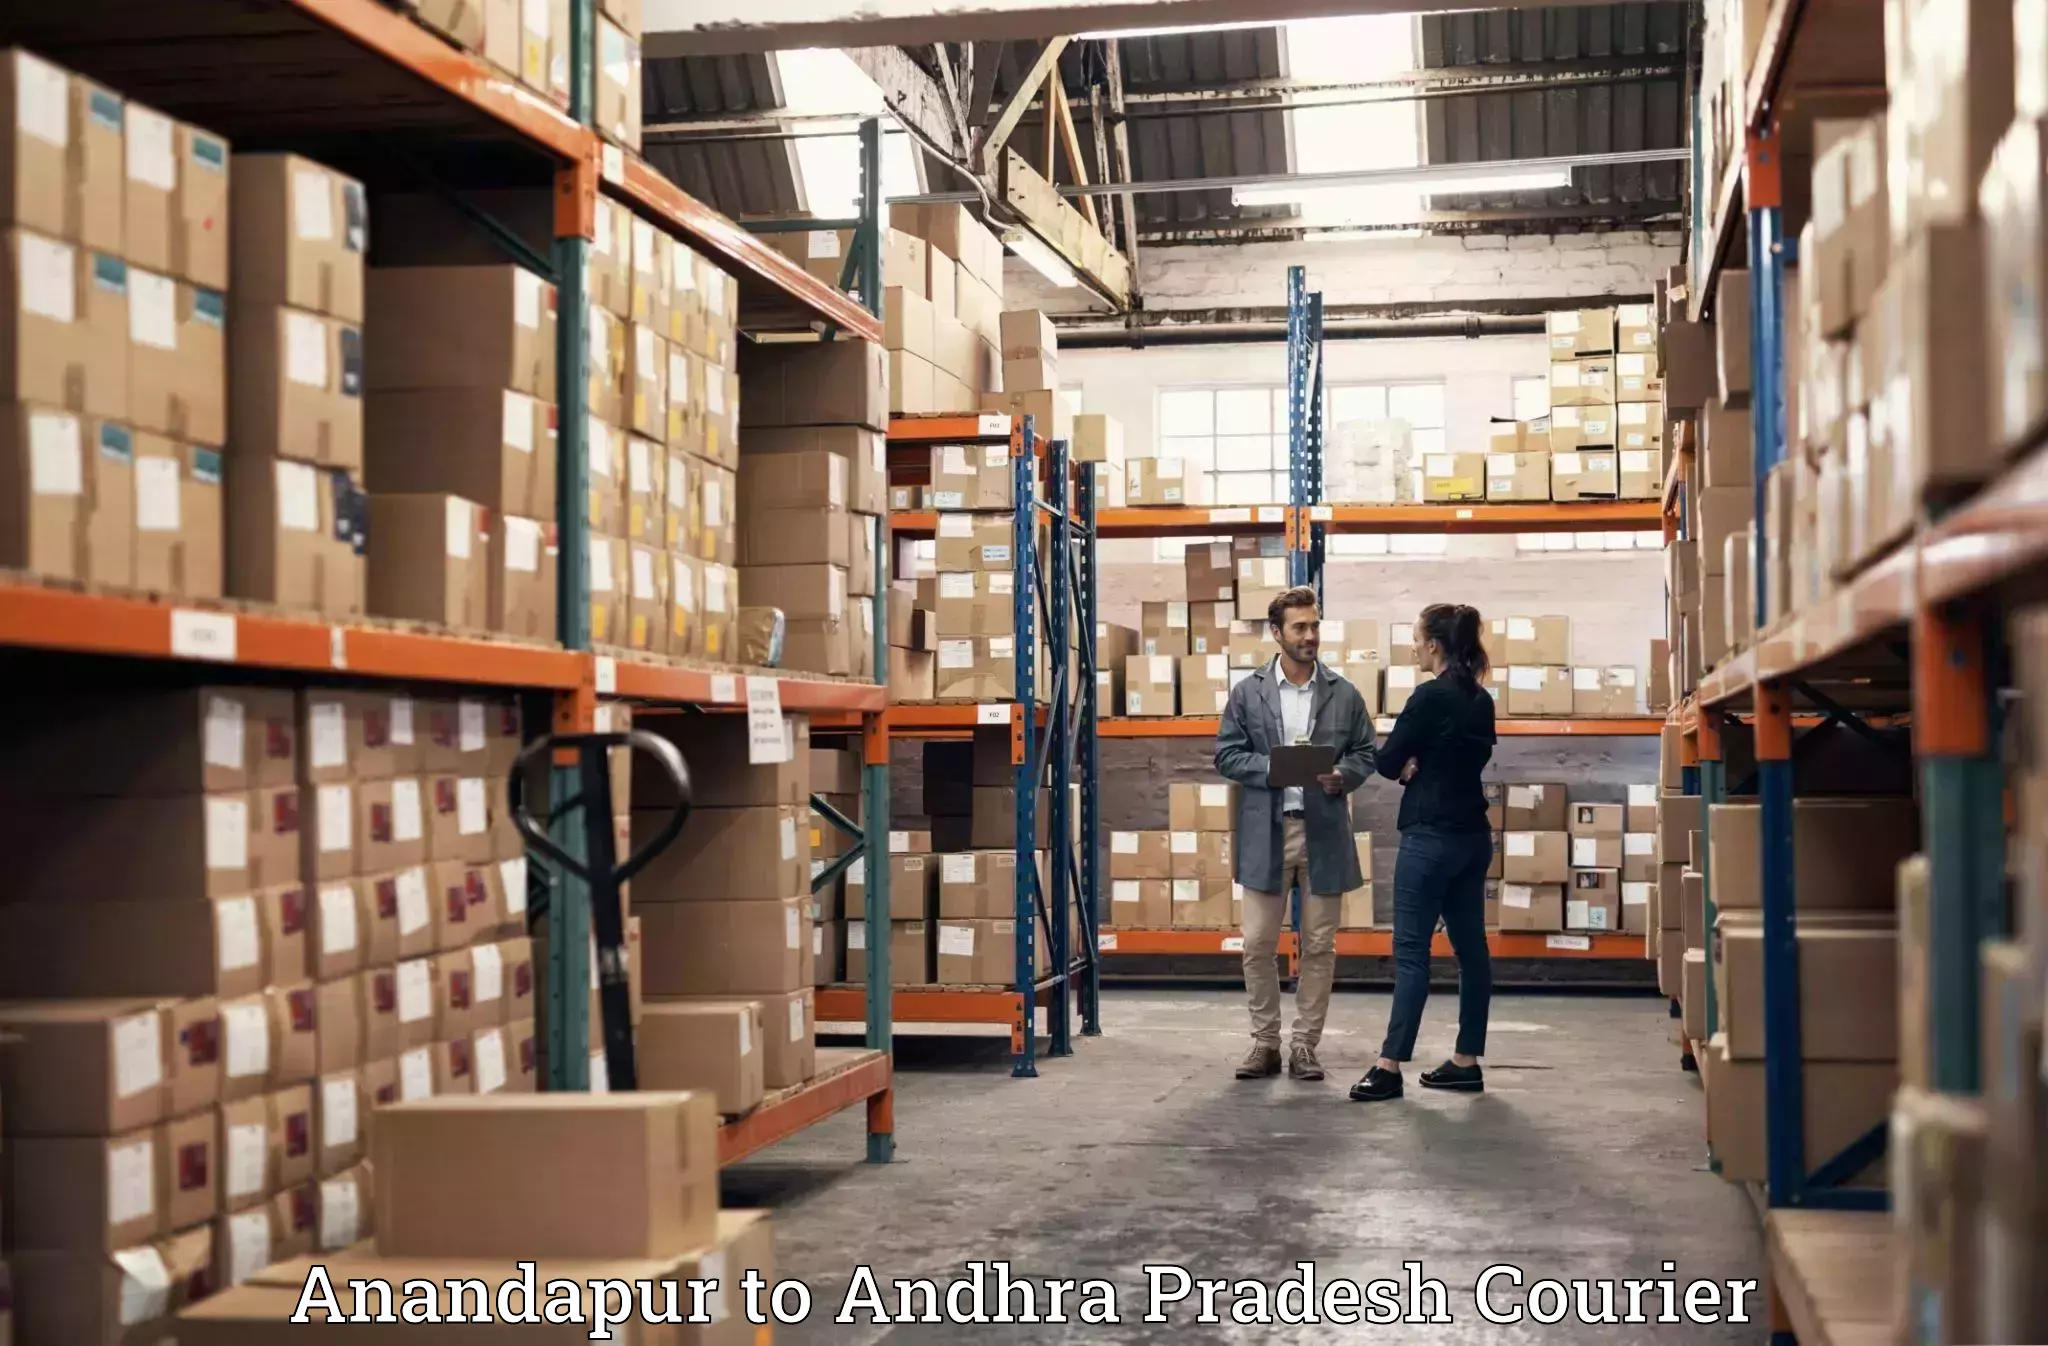 Trusted relocation experts Anandapur to Andhra Pradesh